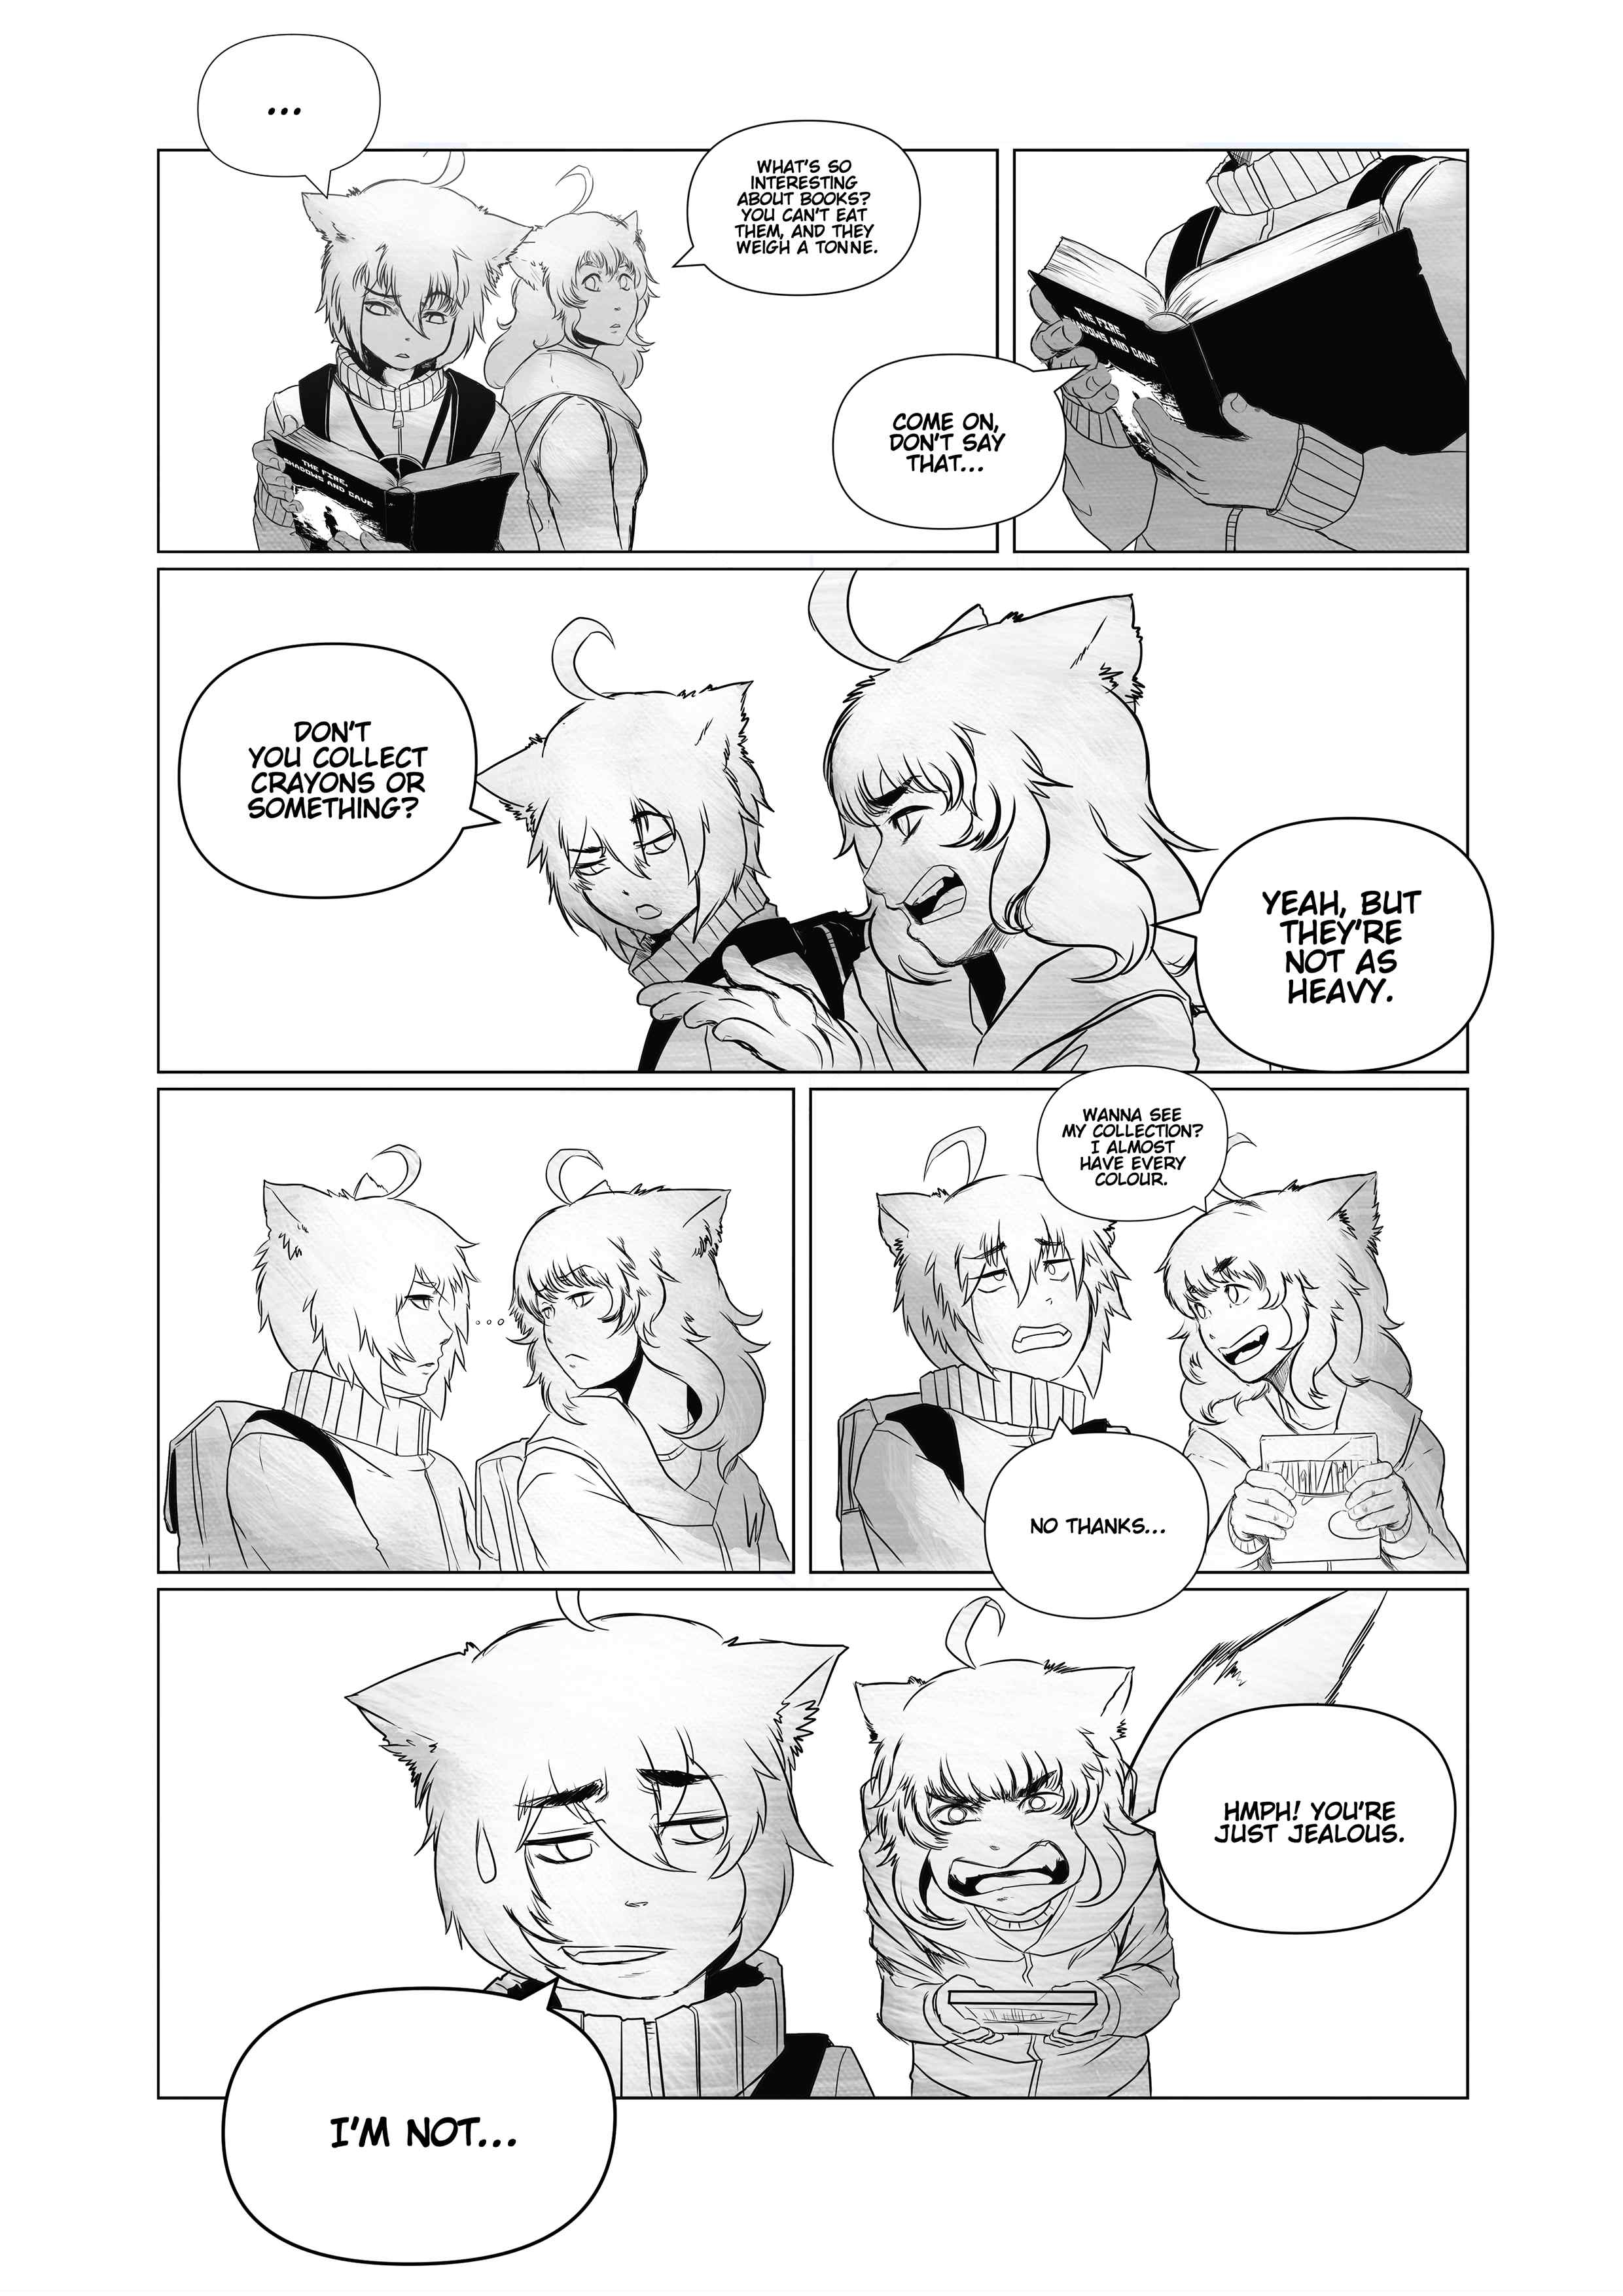 How We End - Page 3